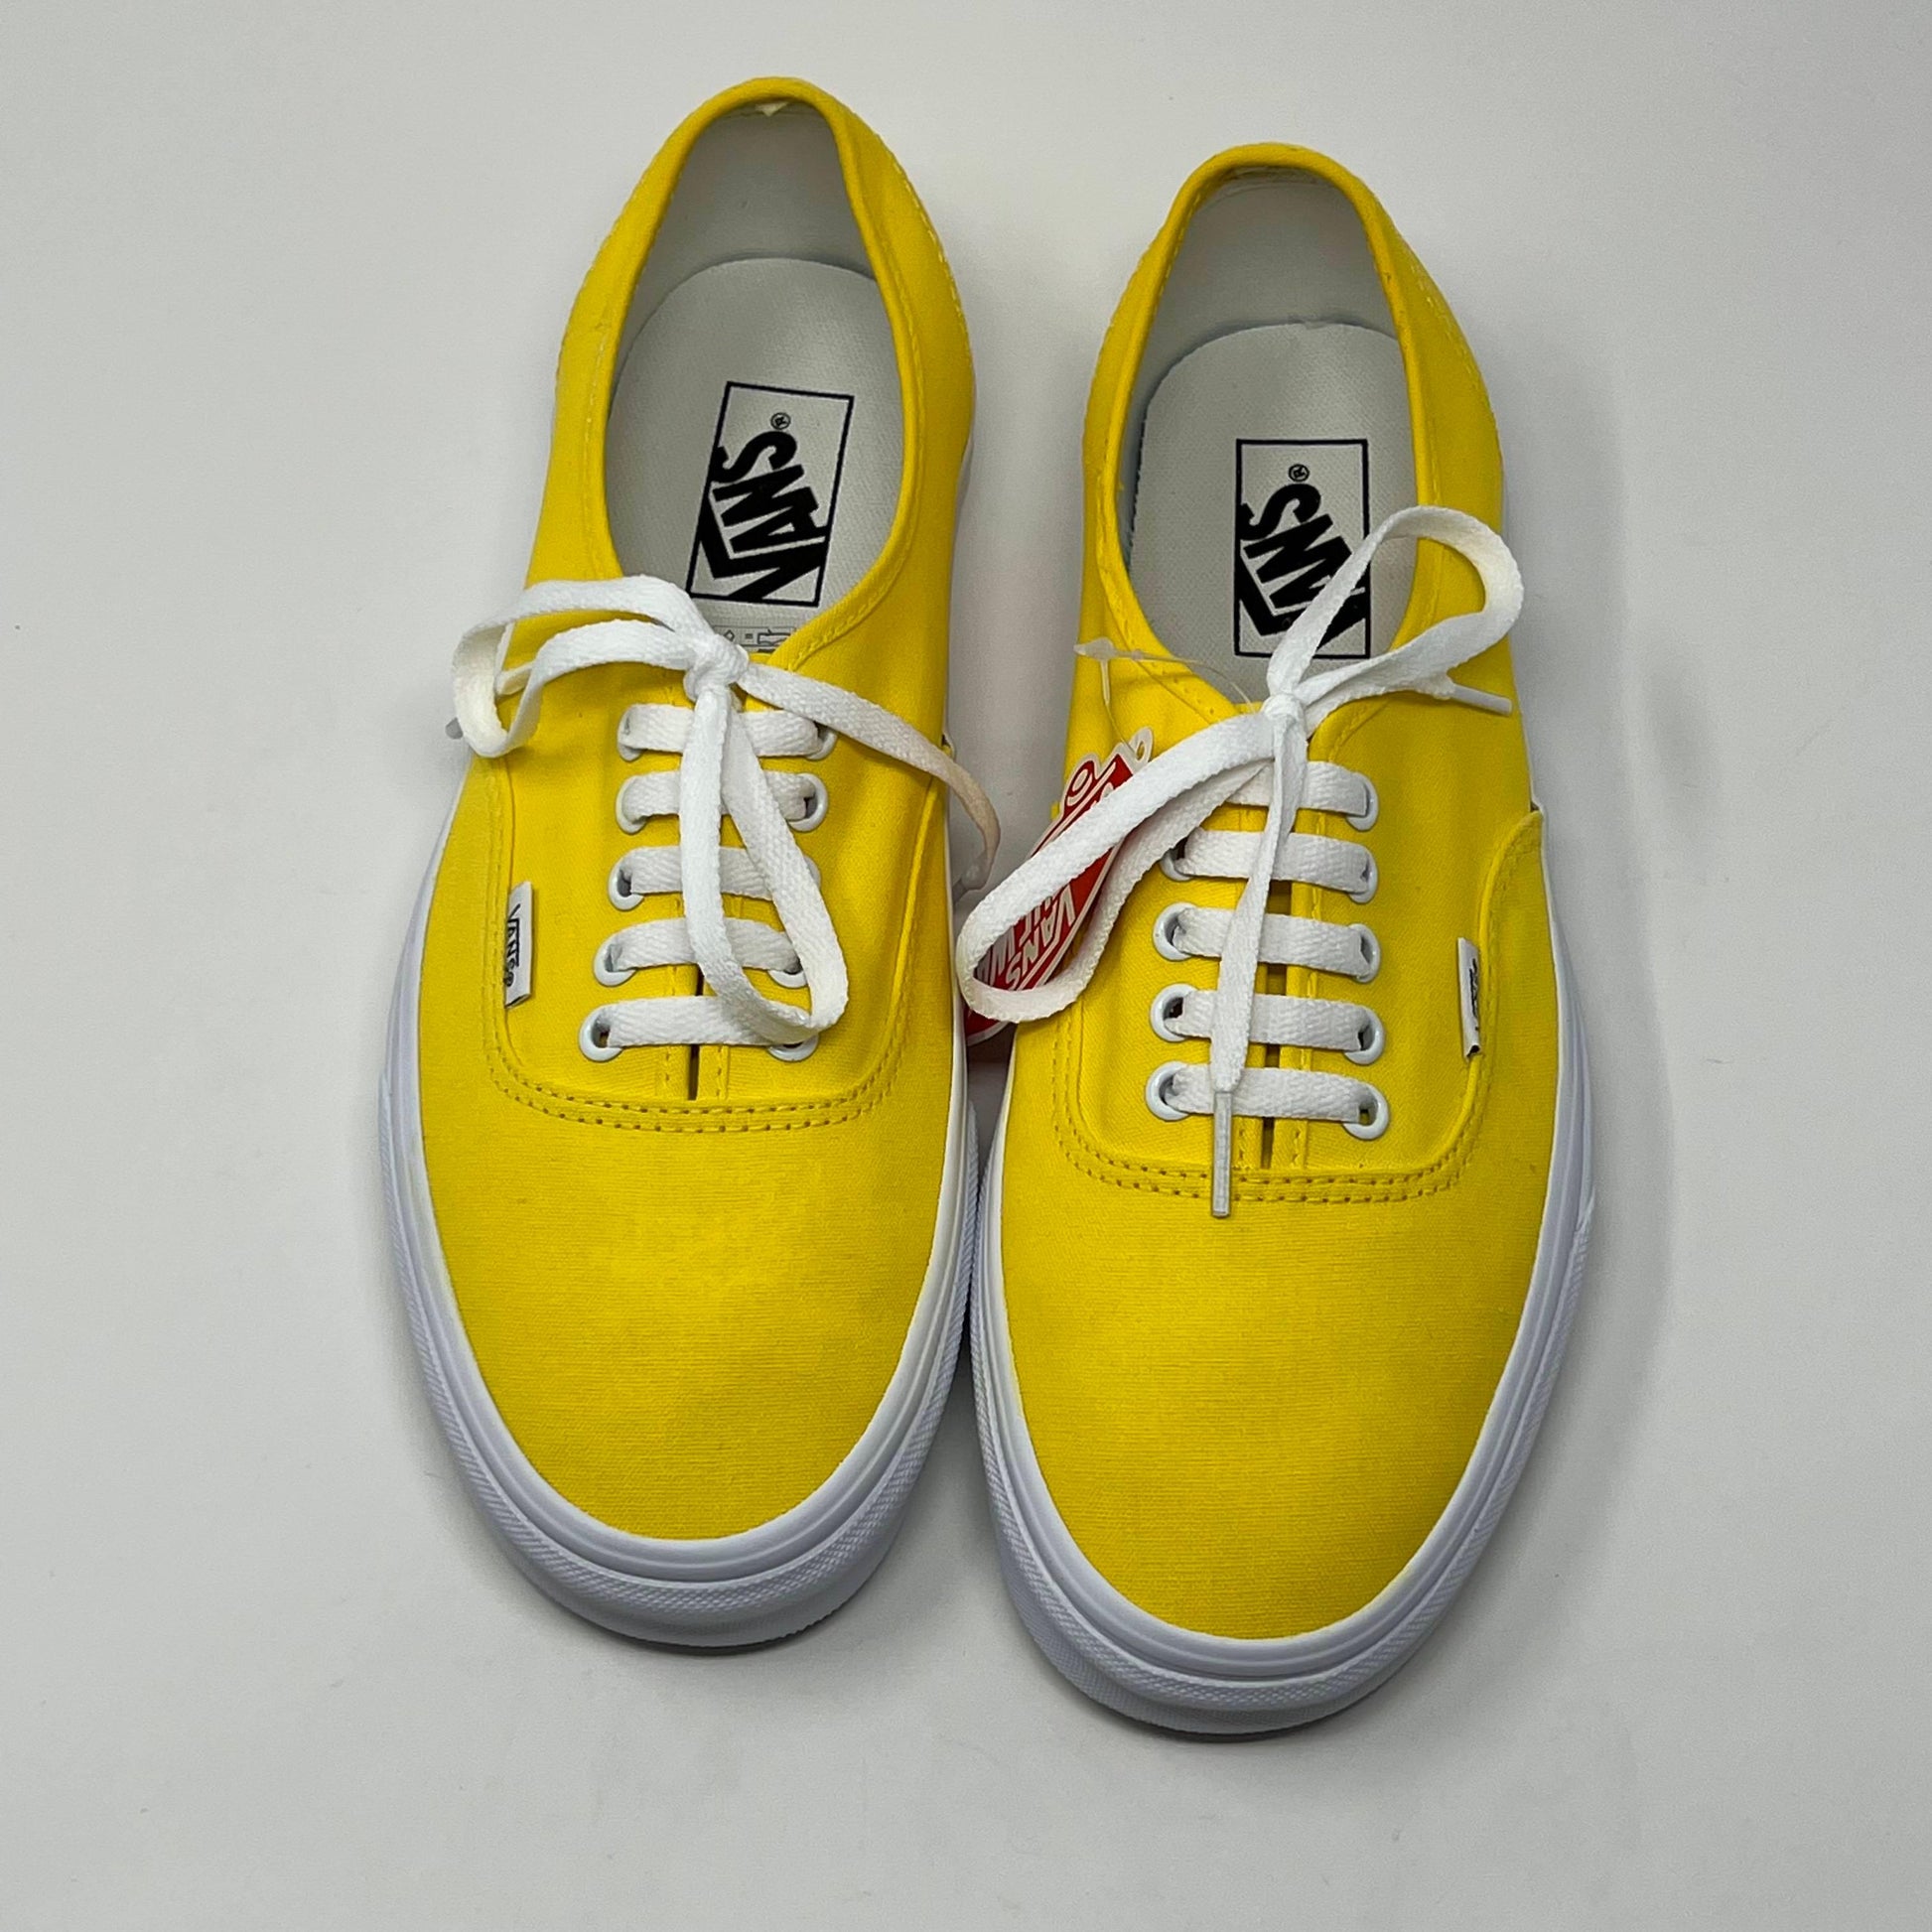 Yello Vans Laced shoes on a white background floor